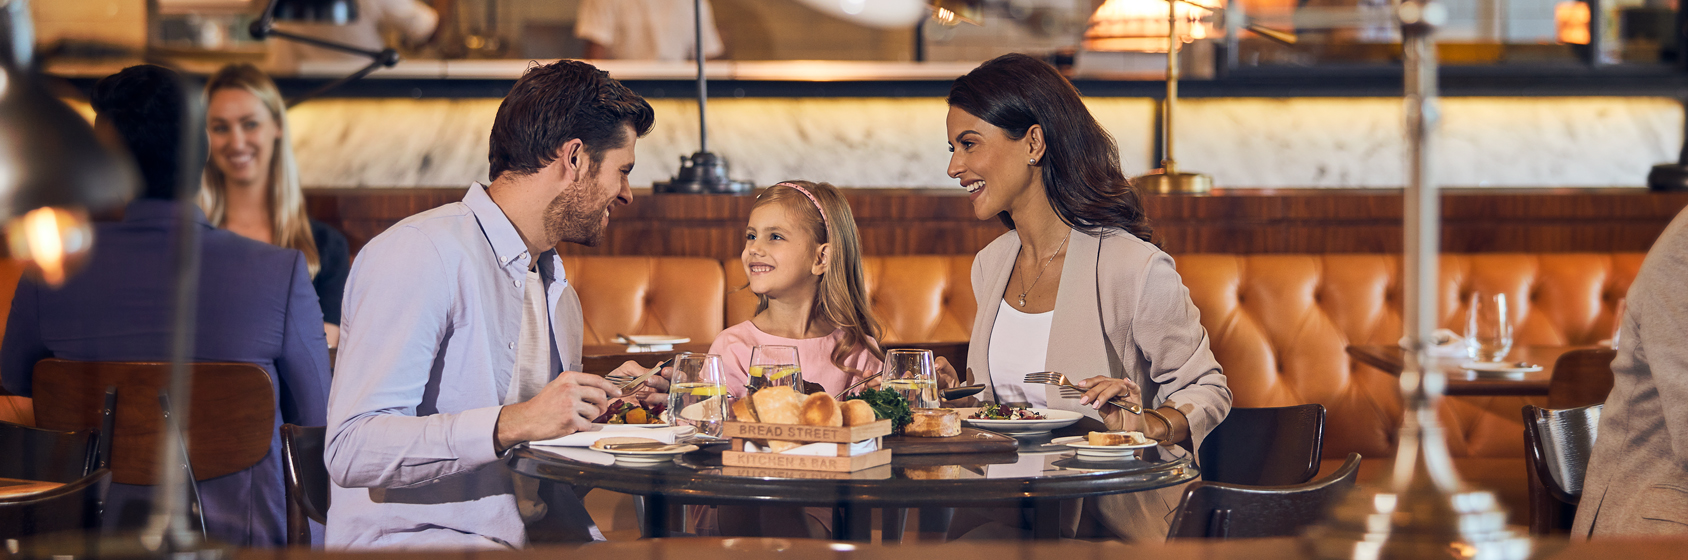 Treat Your Mom to the Best Ever Mother’s Day at Atlantis Dubai